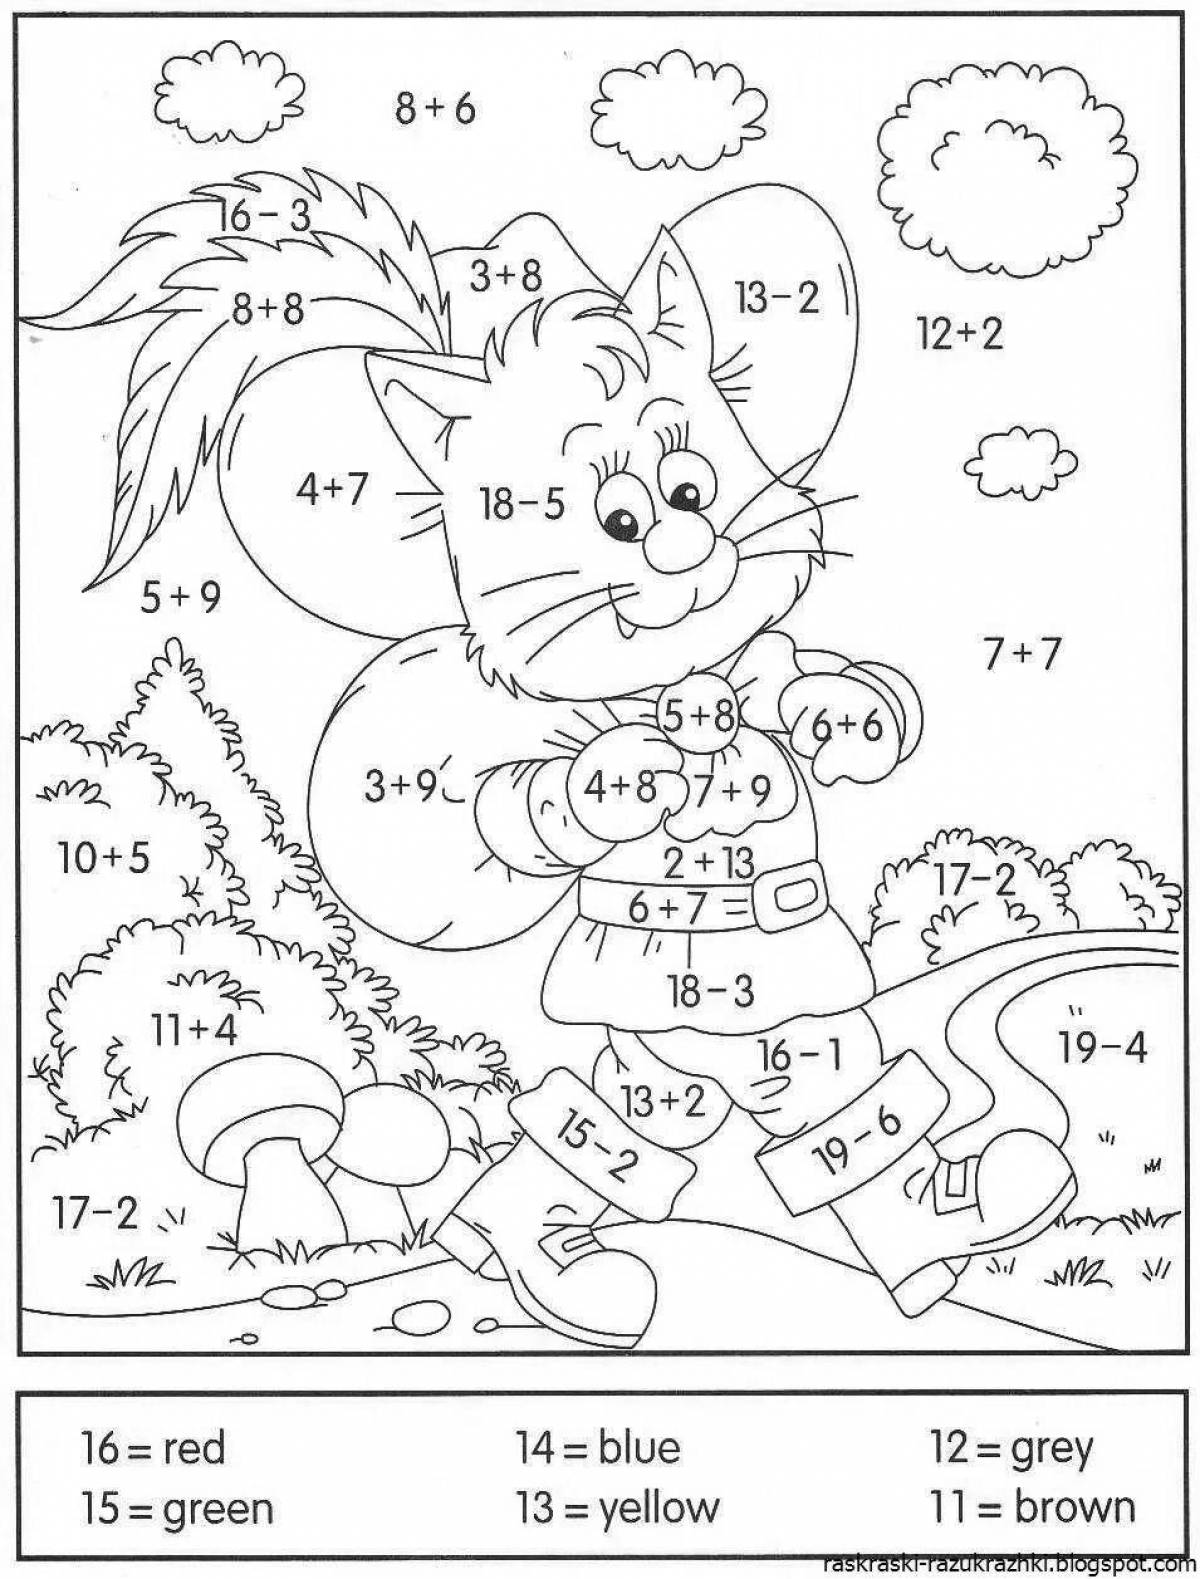 Bright coloring page score within 10 simulator 1 class